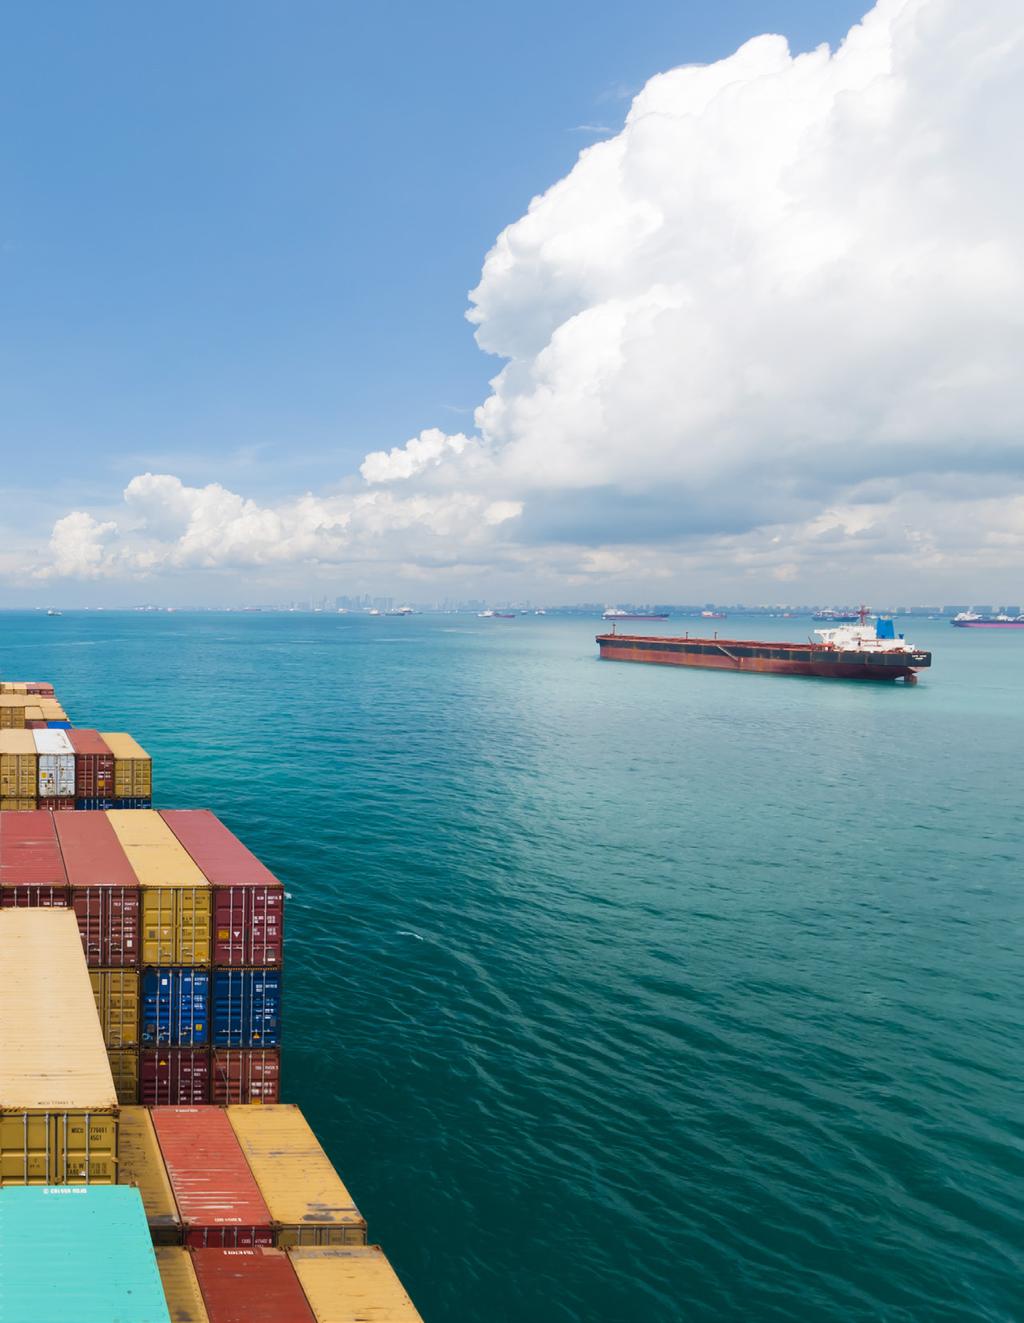 The demand for true broadband connectivity is skyrocketing within the commercial maritime market.